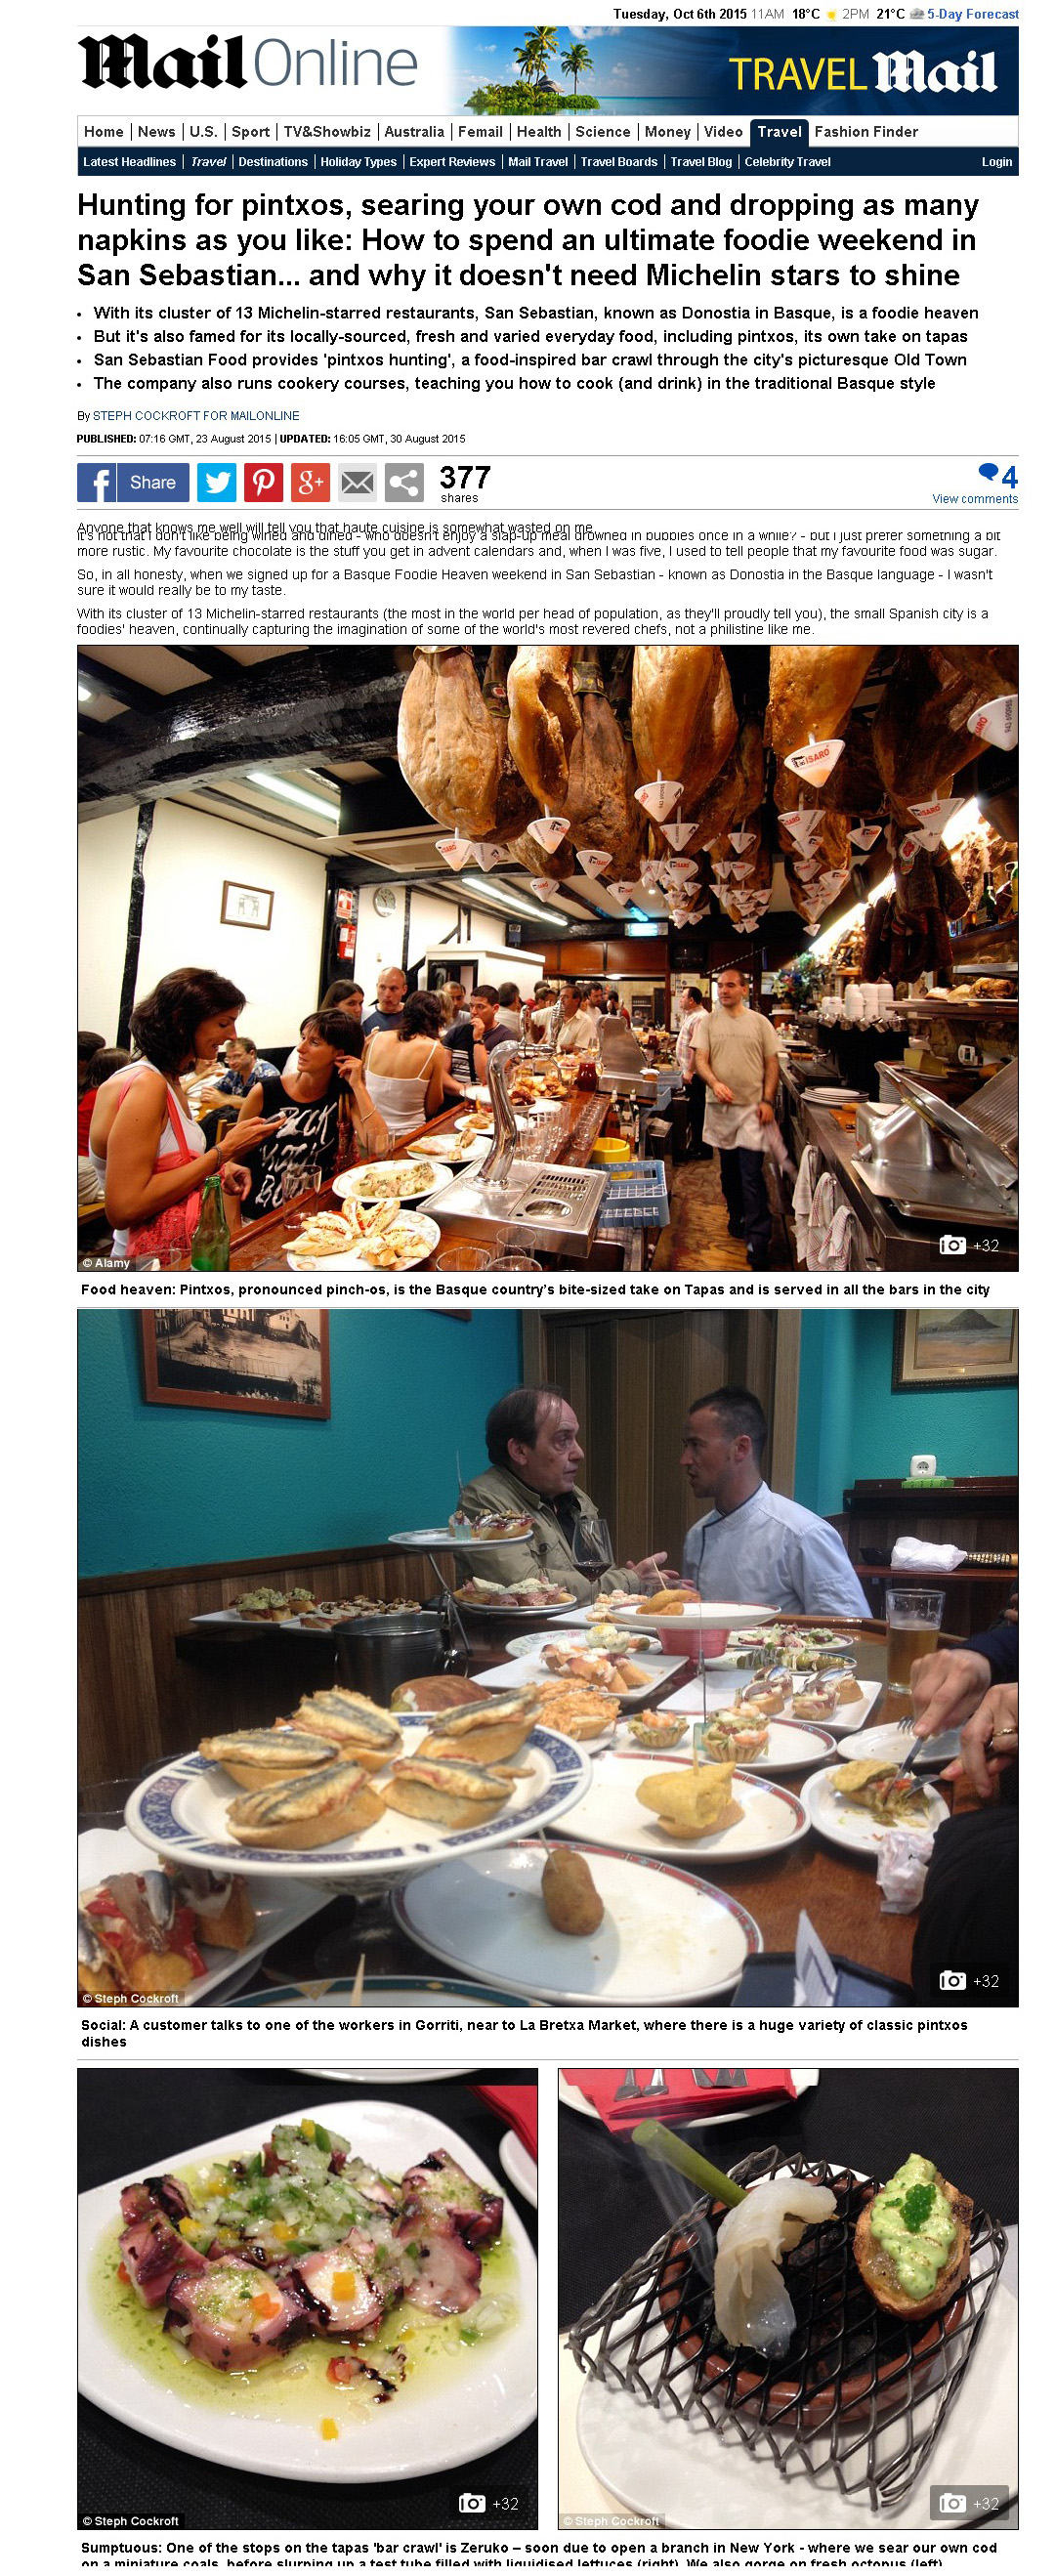 how-to-spend-an-ultimate-foodie-weekend-in-san-sebastian-daily-mail